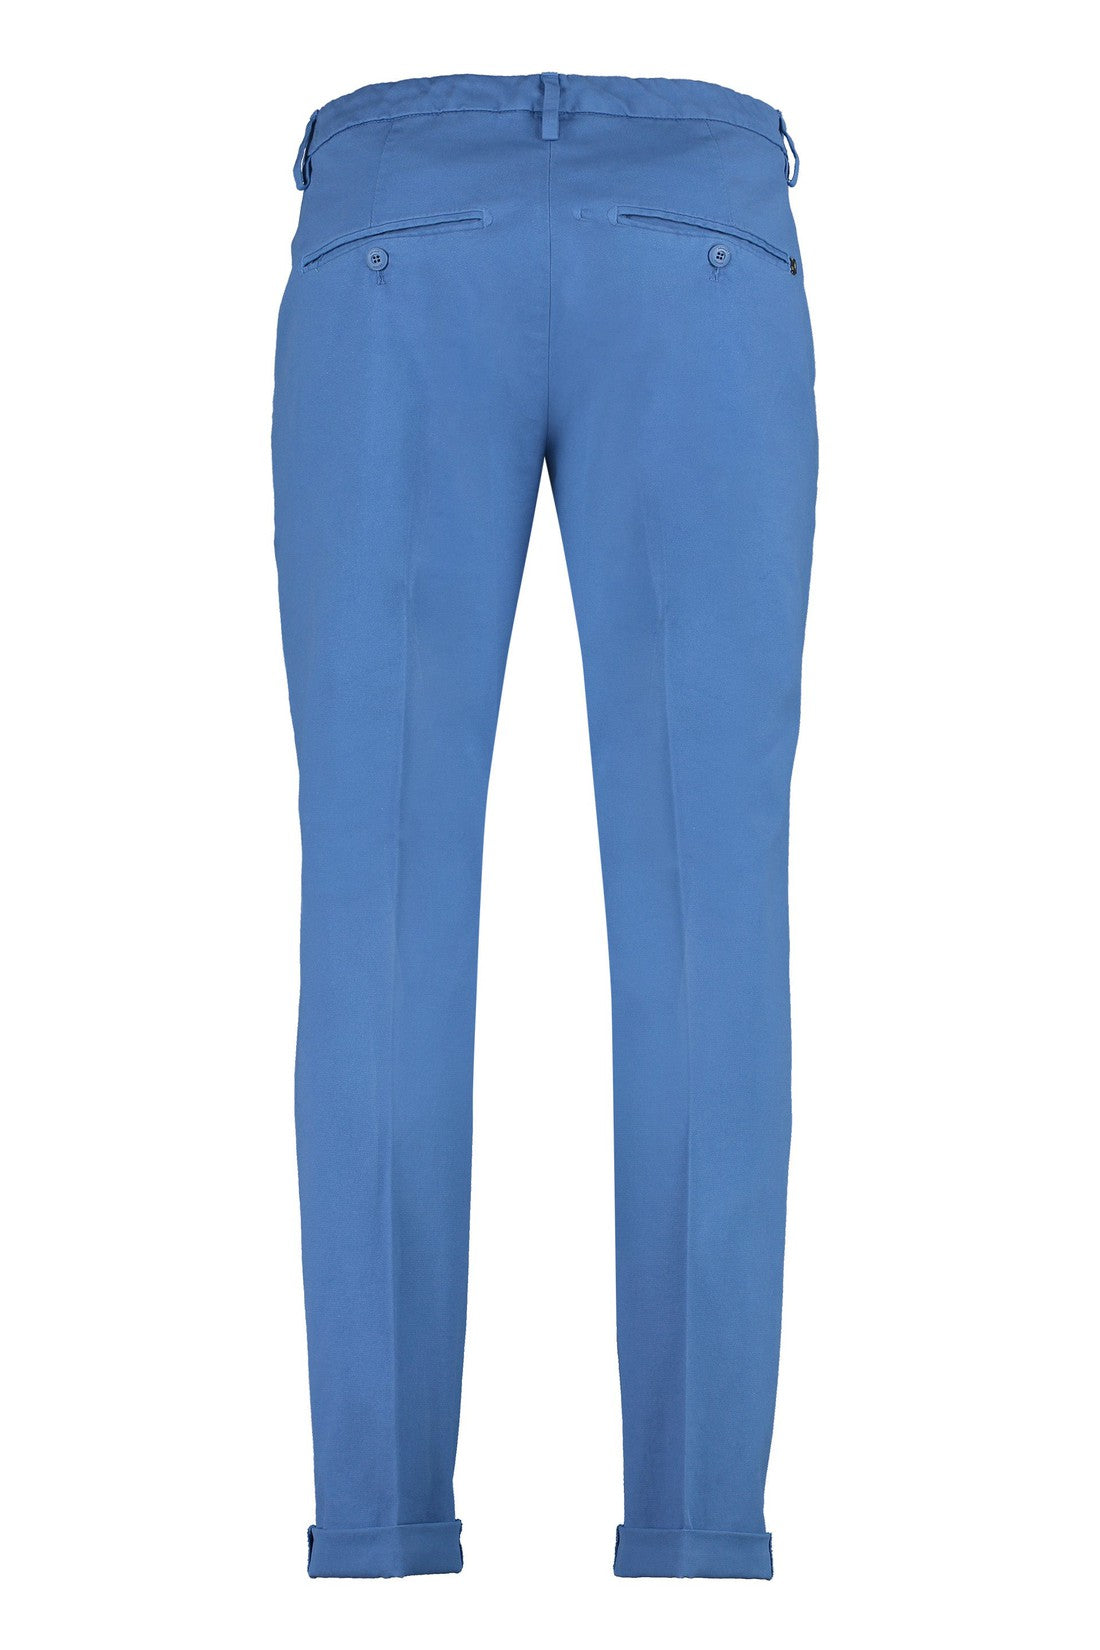 Dondup-OUTLET-SALE-Gaubert slim fit chino trousers-ARCHIVIST